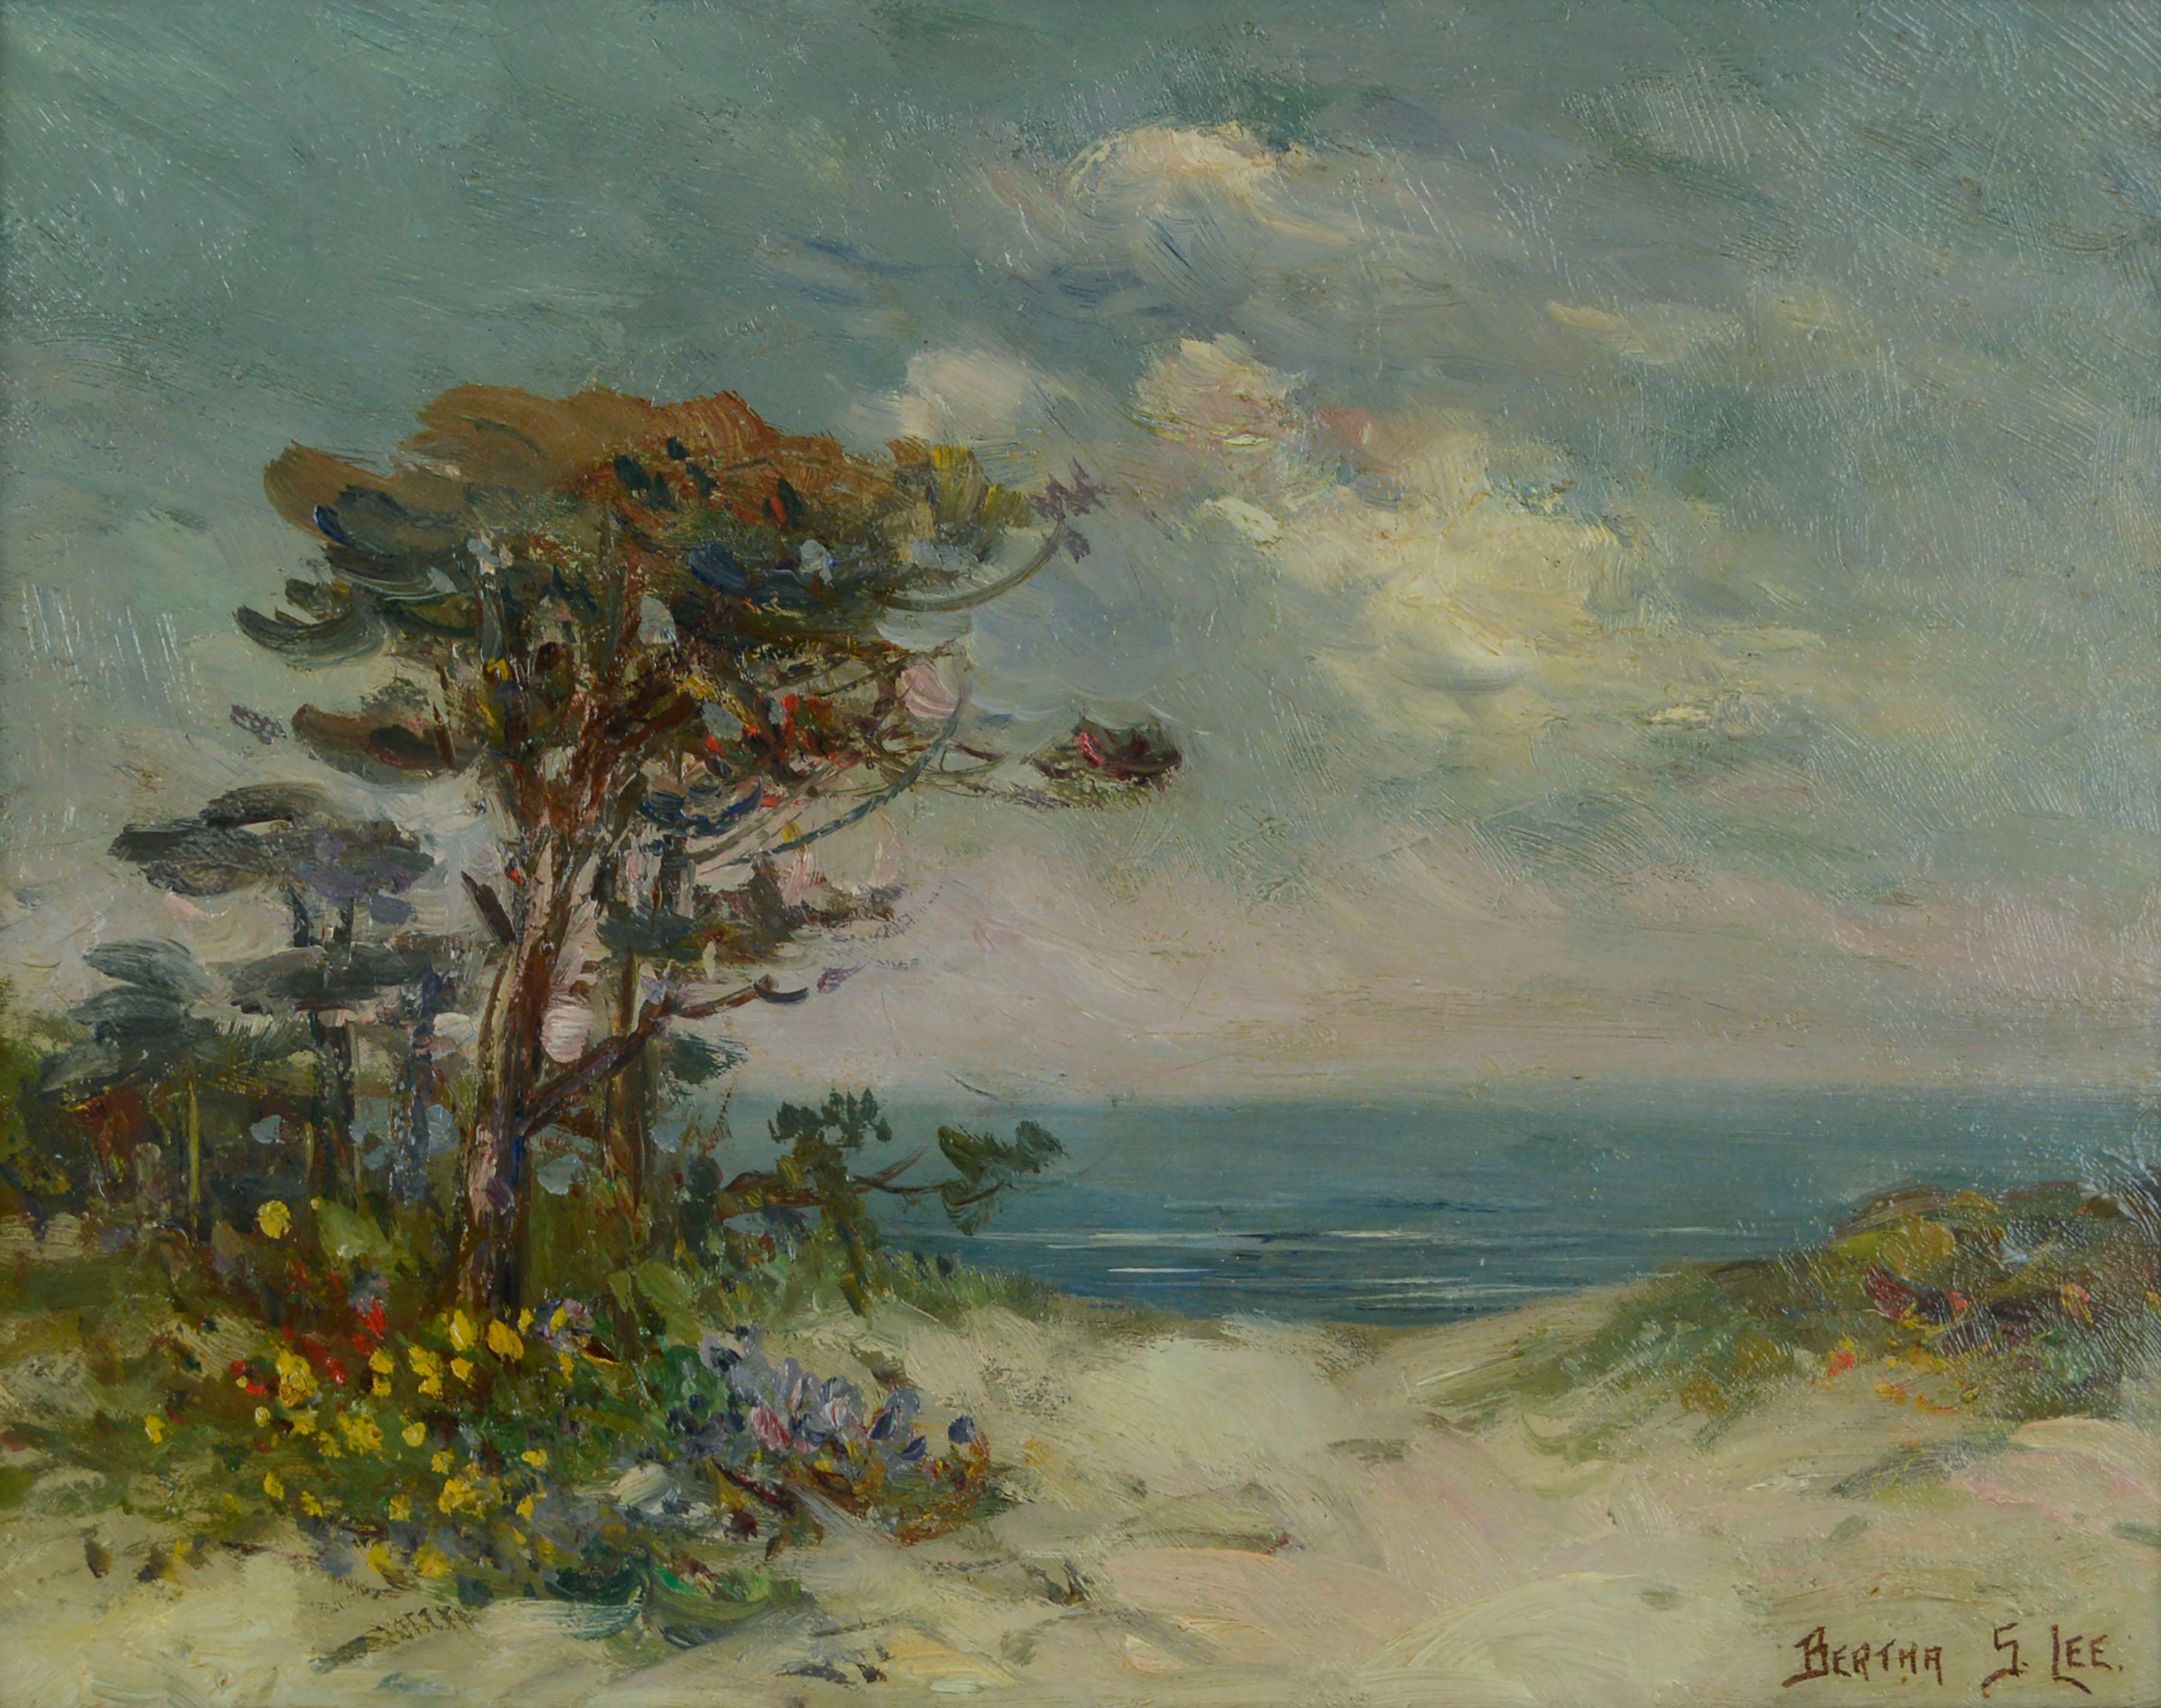 Early 20th Century Monterey Coast Landscape with Cypress Tree & Wildflowers  - Painting by Bertha Elizabeth Stringer Lee